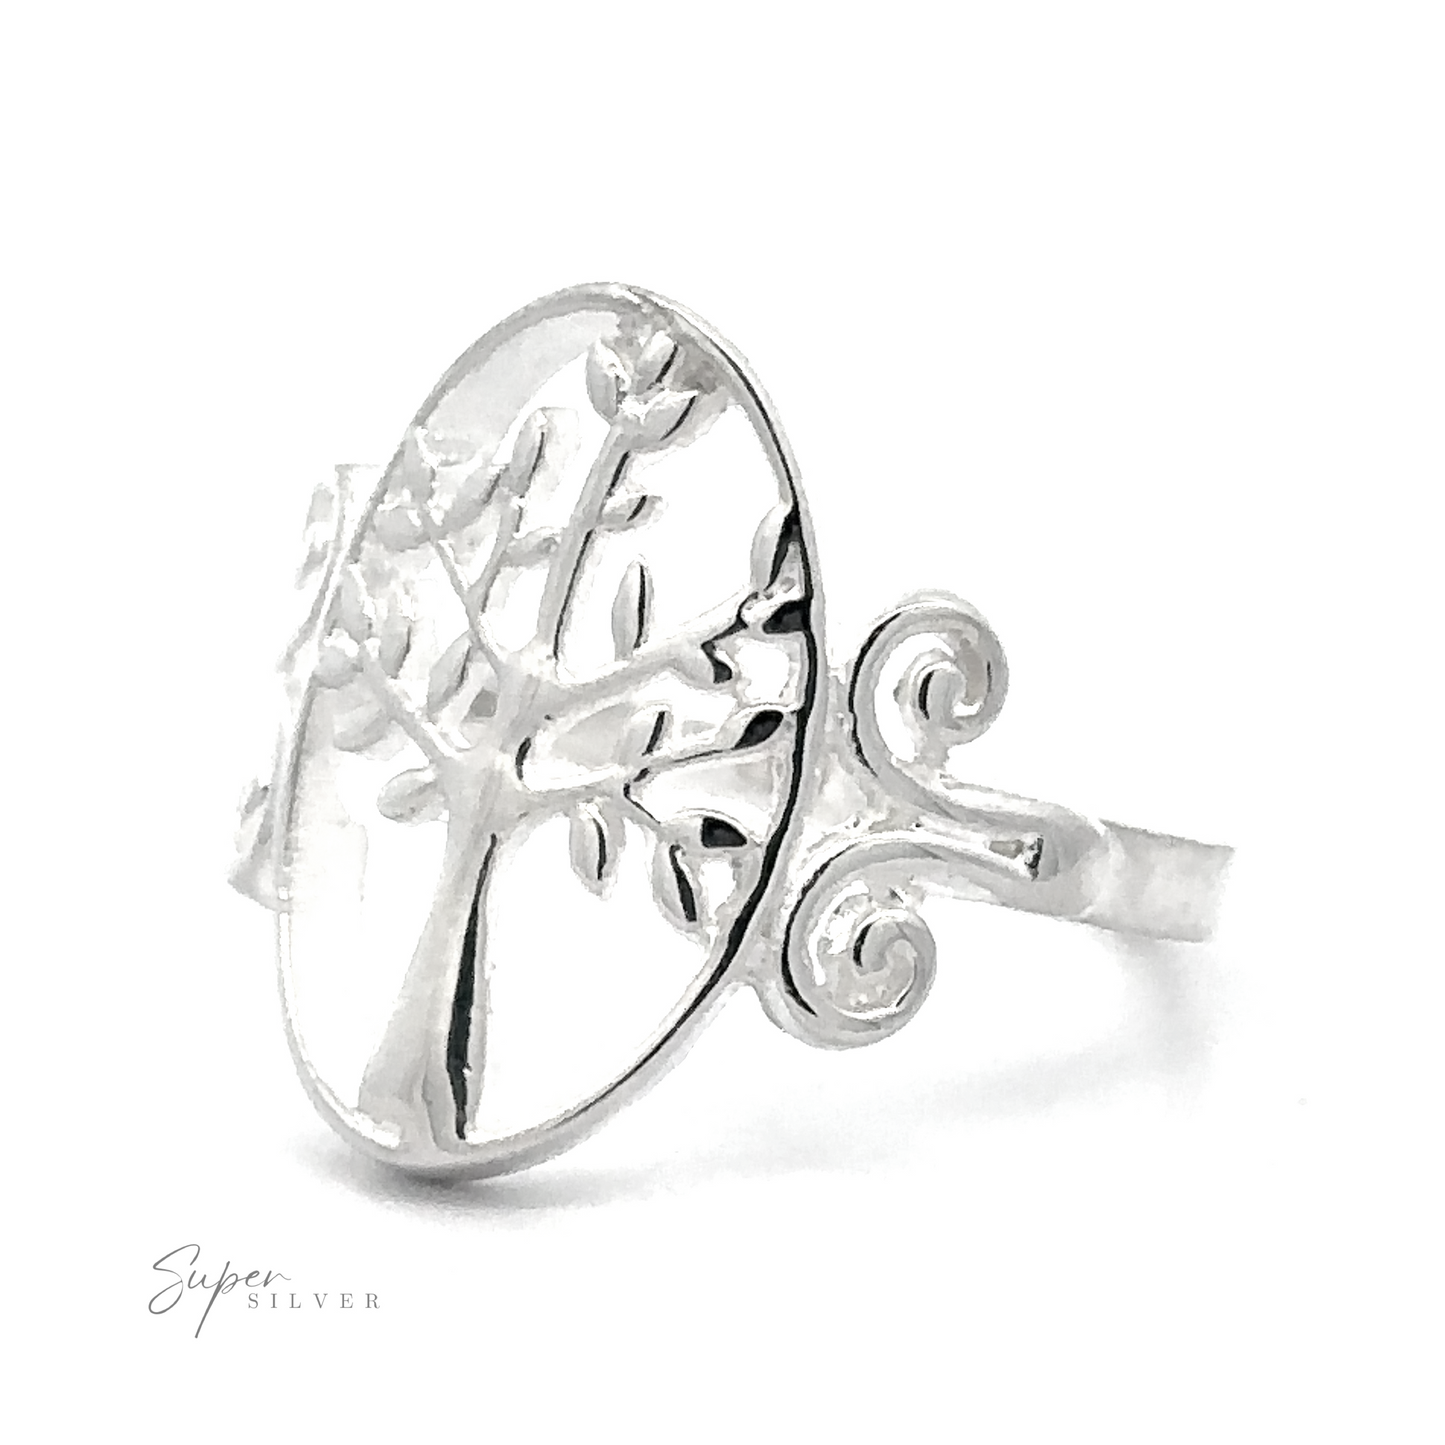 Elegant Silver Tree Ring with Oval Setting ring with a tree design on a white background.